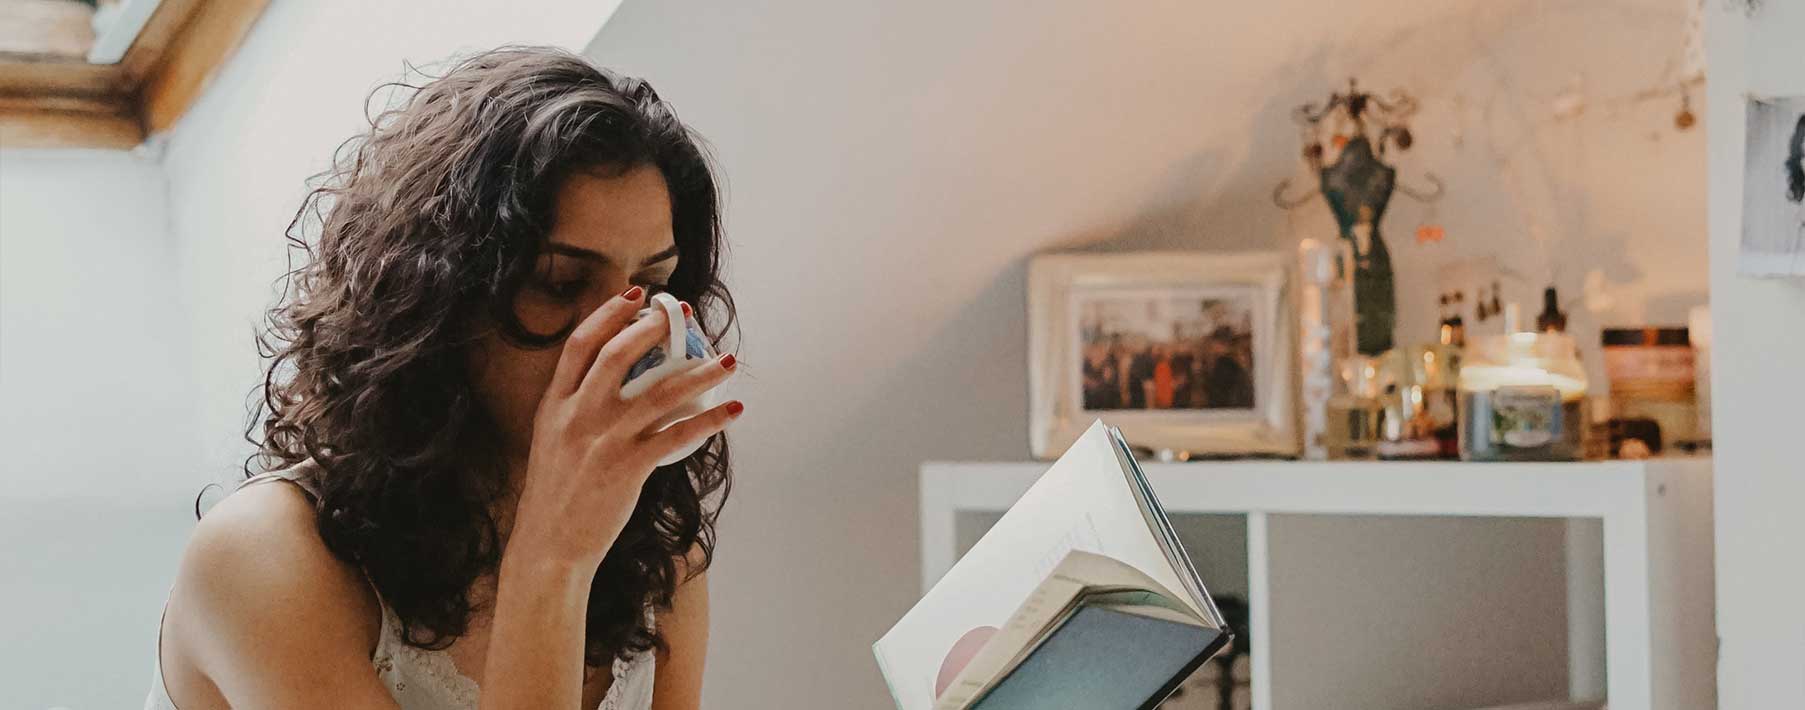 Image of a woman drinking from a mug and reading a book